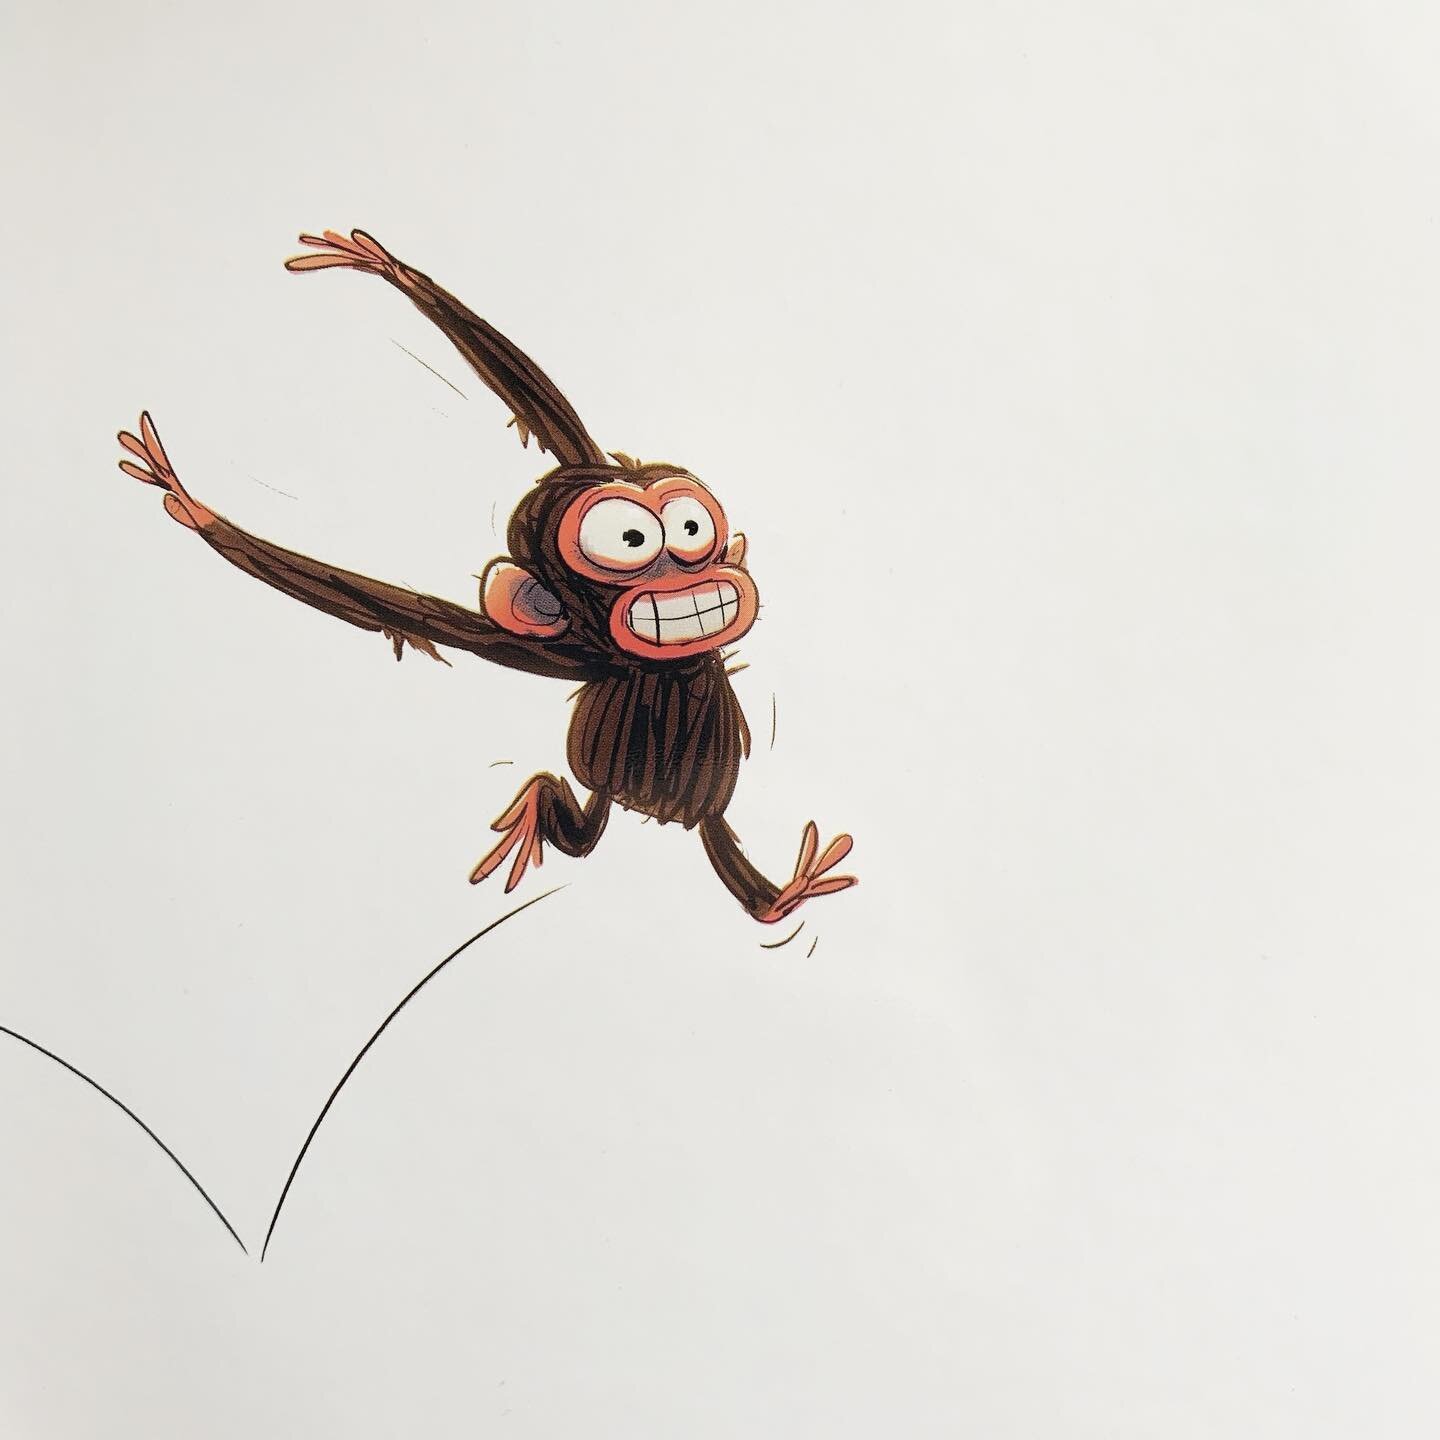 &quot;Finally Jim looked happy. But he didn't feel happy inside.&quot;⁠⁠
⁠From &quot;Grumpy Monkey&quot; by Suzanne Lang and Max Lang.⁠⁠
~⁠⁠
#grumpymonkey #suzannelang #maxlang #jakepanzee #randomhouse #boadbook #picturebook #kidlit #childrensfiction